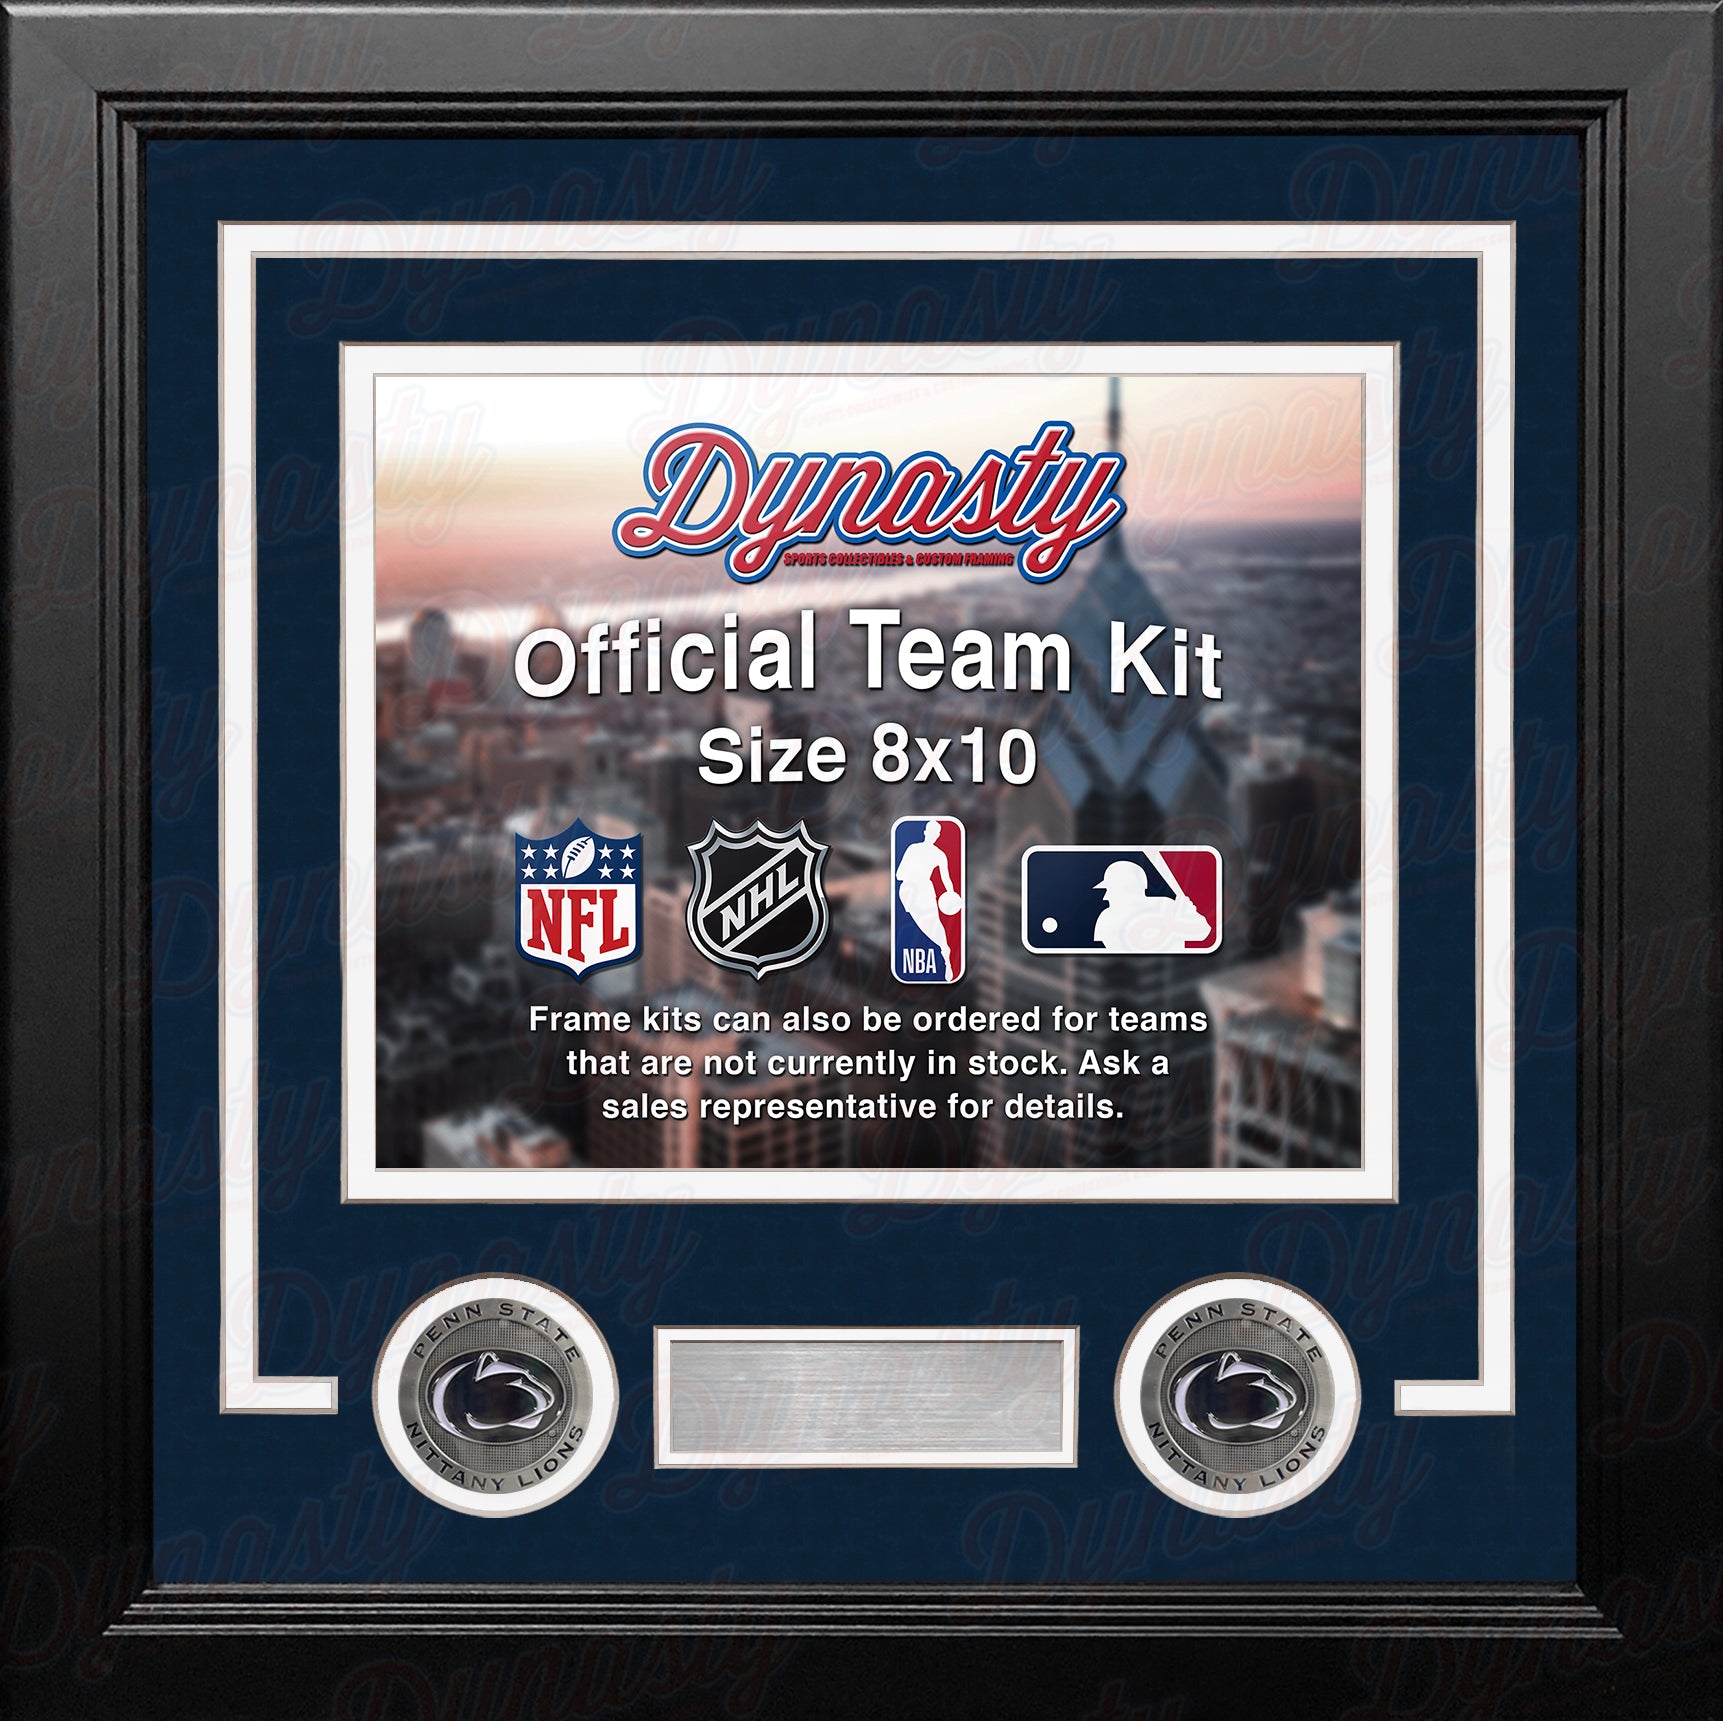 Penn State Nittany Lions Custom NCAA College 8x10 Picture Frame Kit (Multiple Colors) - Dynasty Sports & Framing 